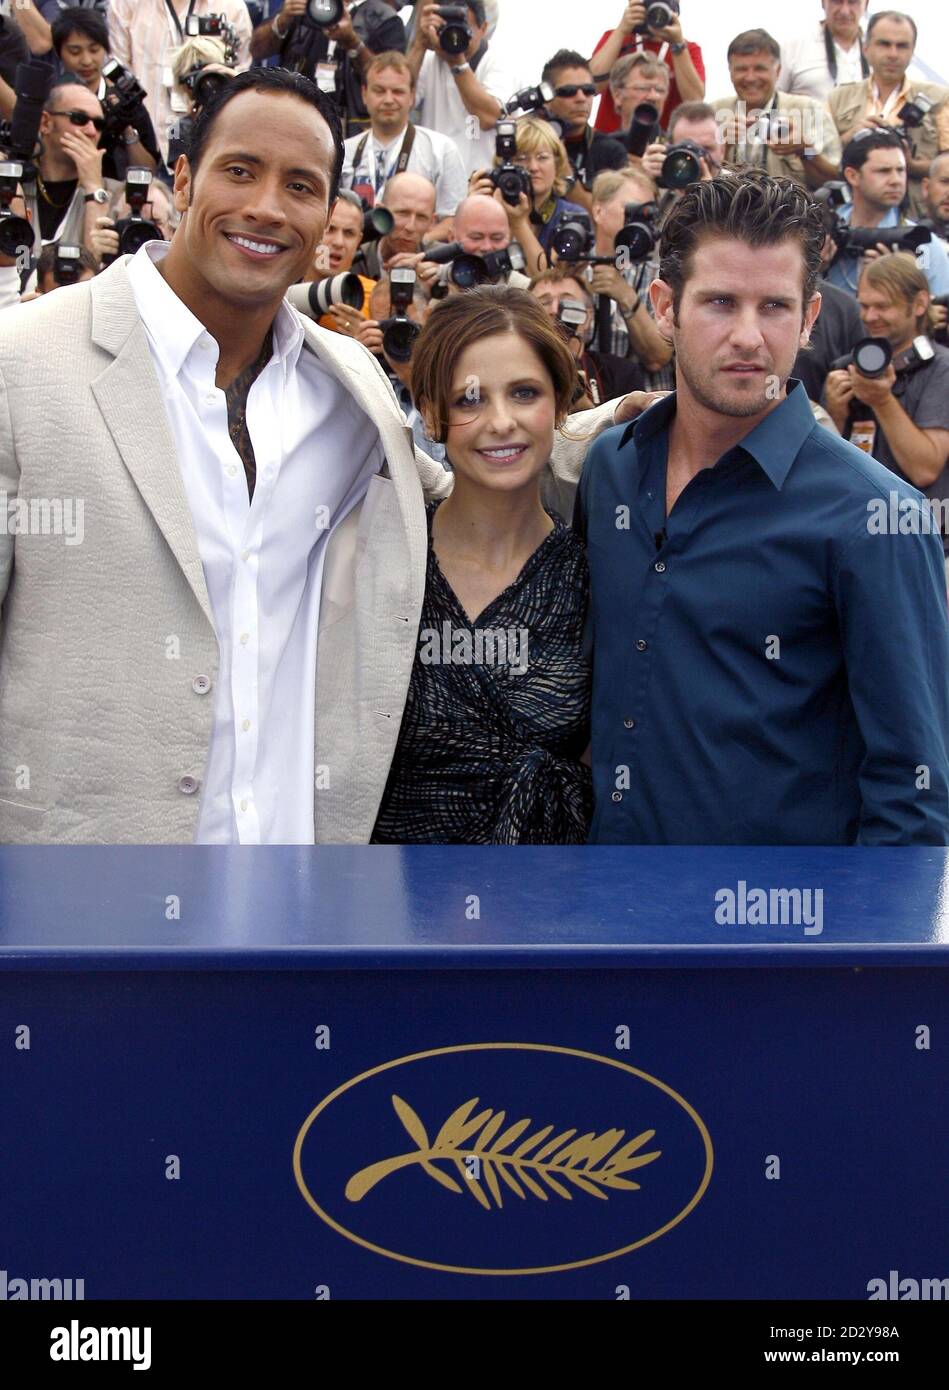 U.S. director Richard Kelly (R) and cast members Dwayne 'The Rock' Johnson (L) and U.S. actress Sarah Michelle Gellar attend a photocall for the director's in-competition film 'Southland Tales' at the 59th Cannes Film Festival, May 21, 2006. Stock Photo